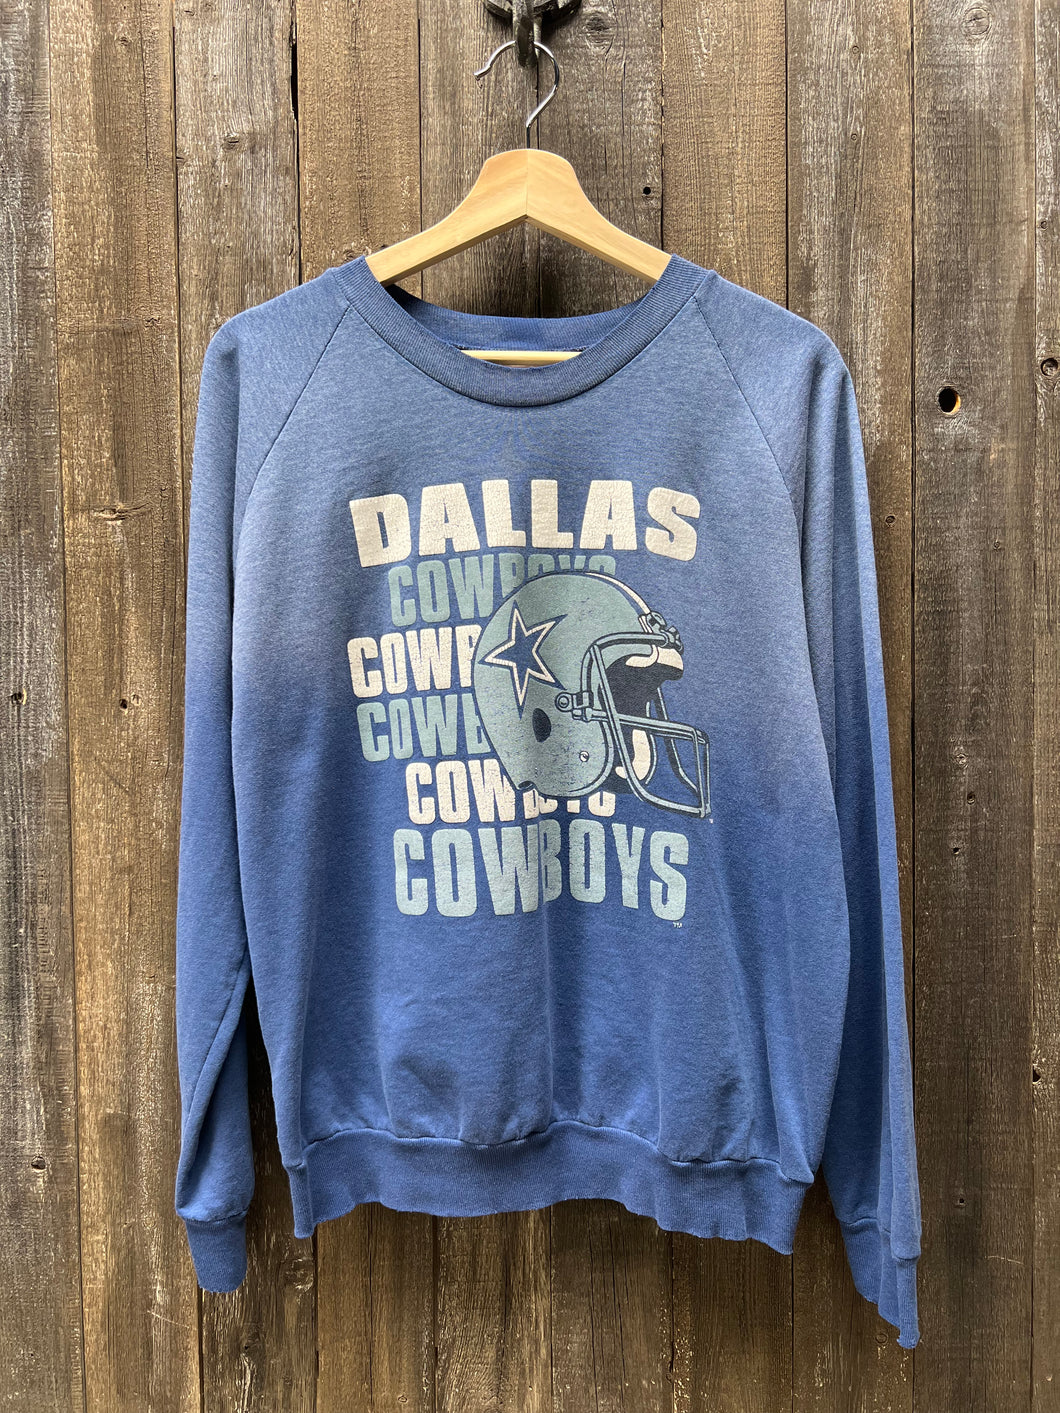 Dallas Cowboys Sweatshirt -S/M-Customize Your Embroidery Wording